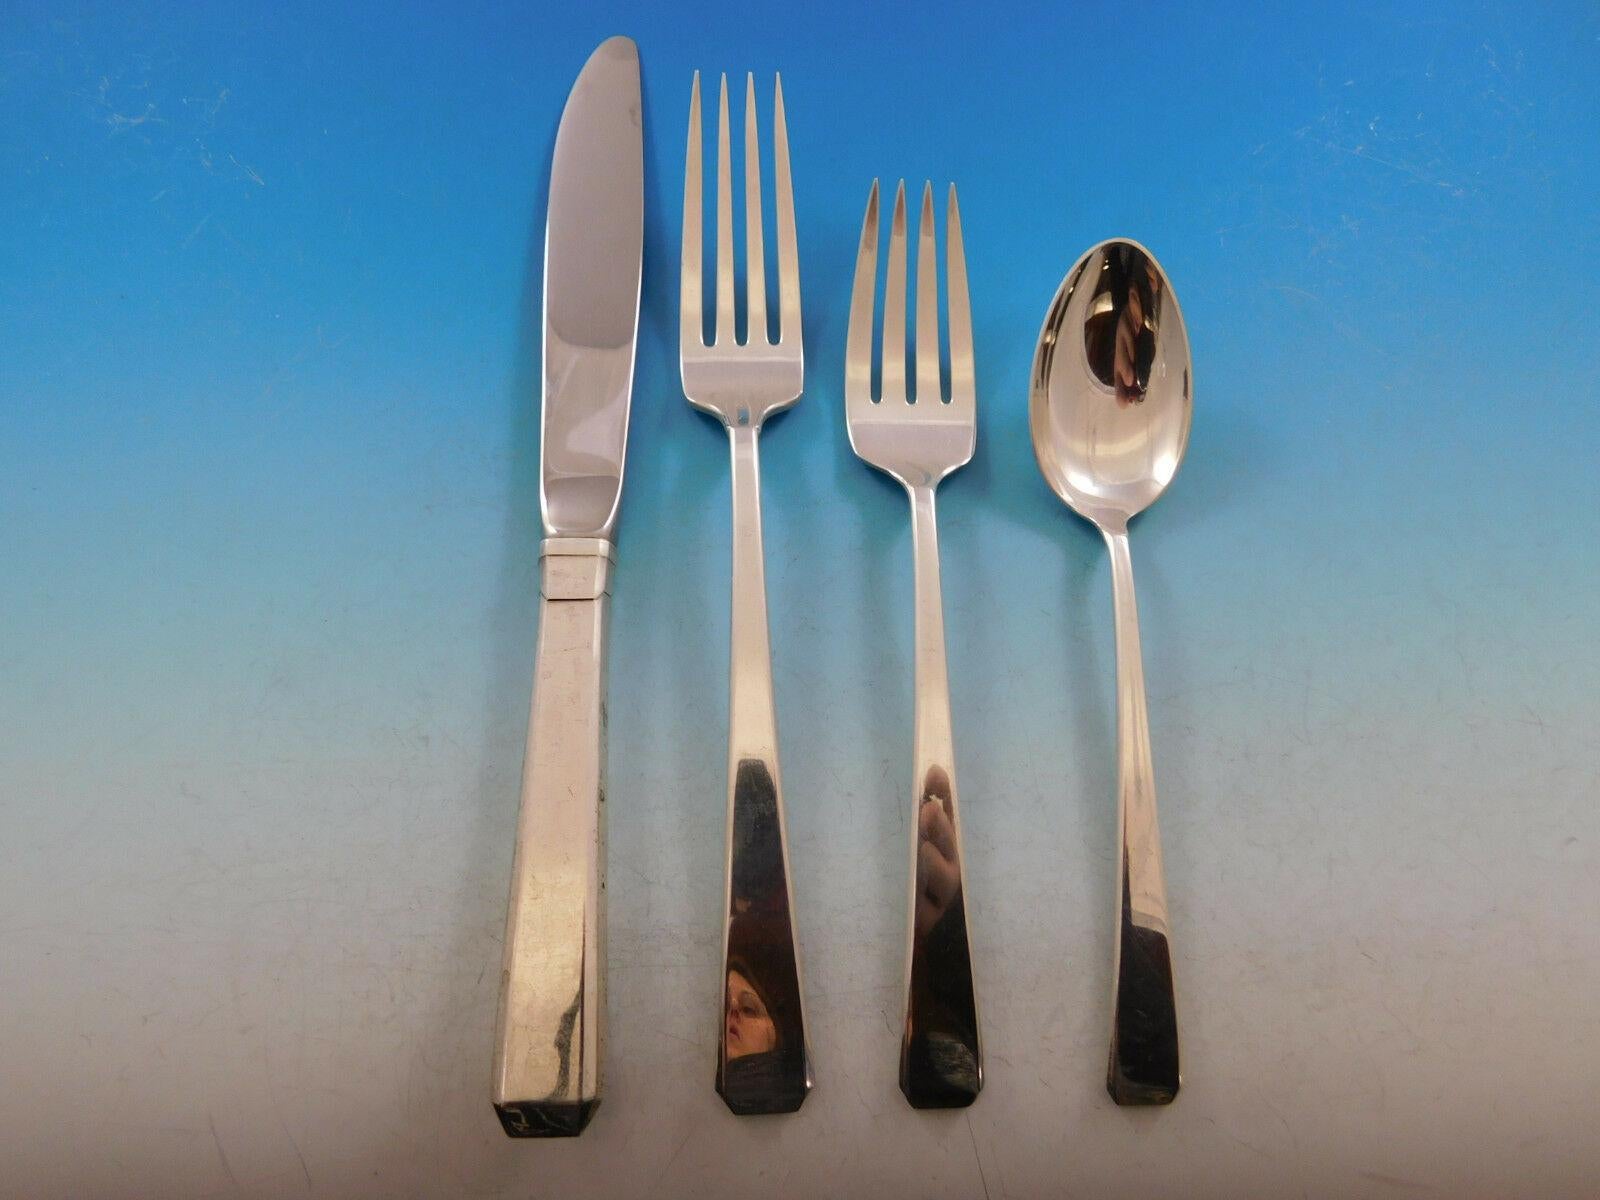 Monumental craftsman by Towle sterling silver flatware set, 124 pieces. This set includes:

12 regular knives, 8 3/4